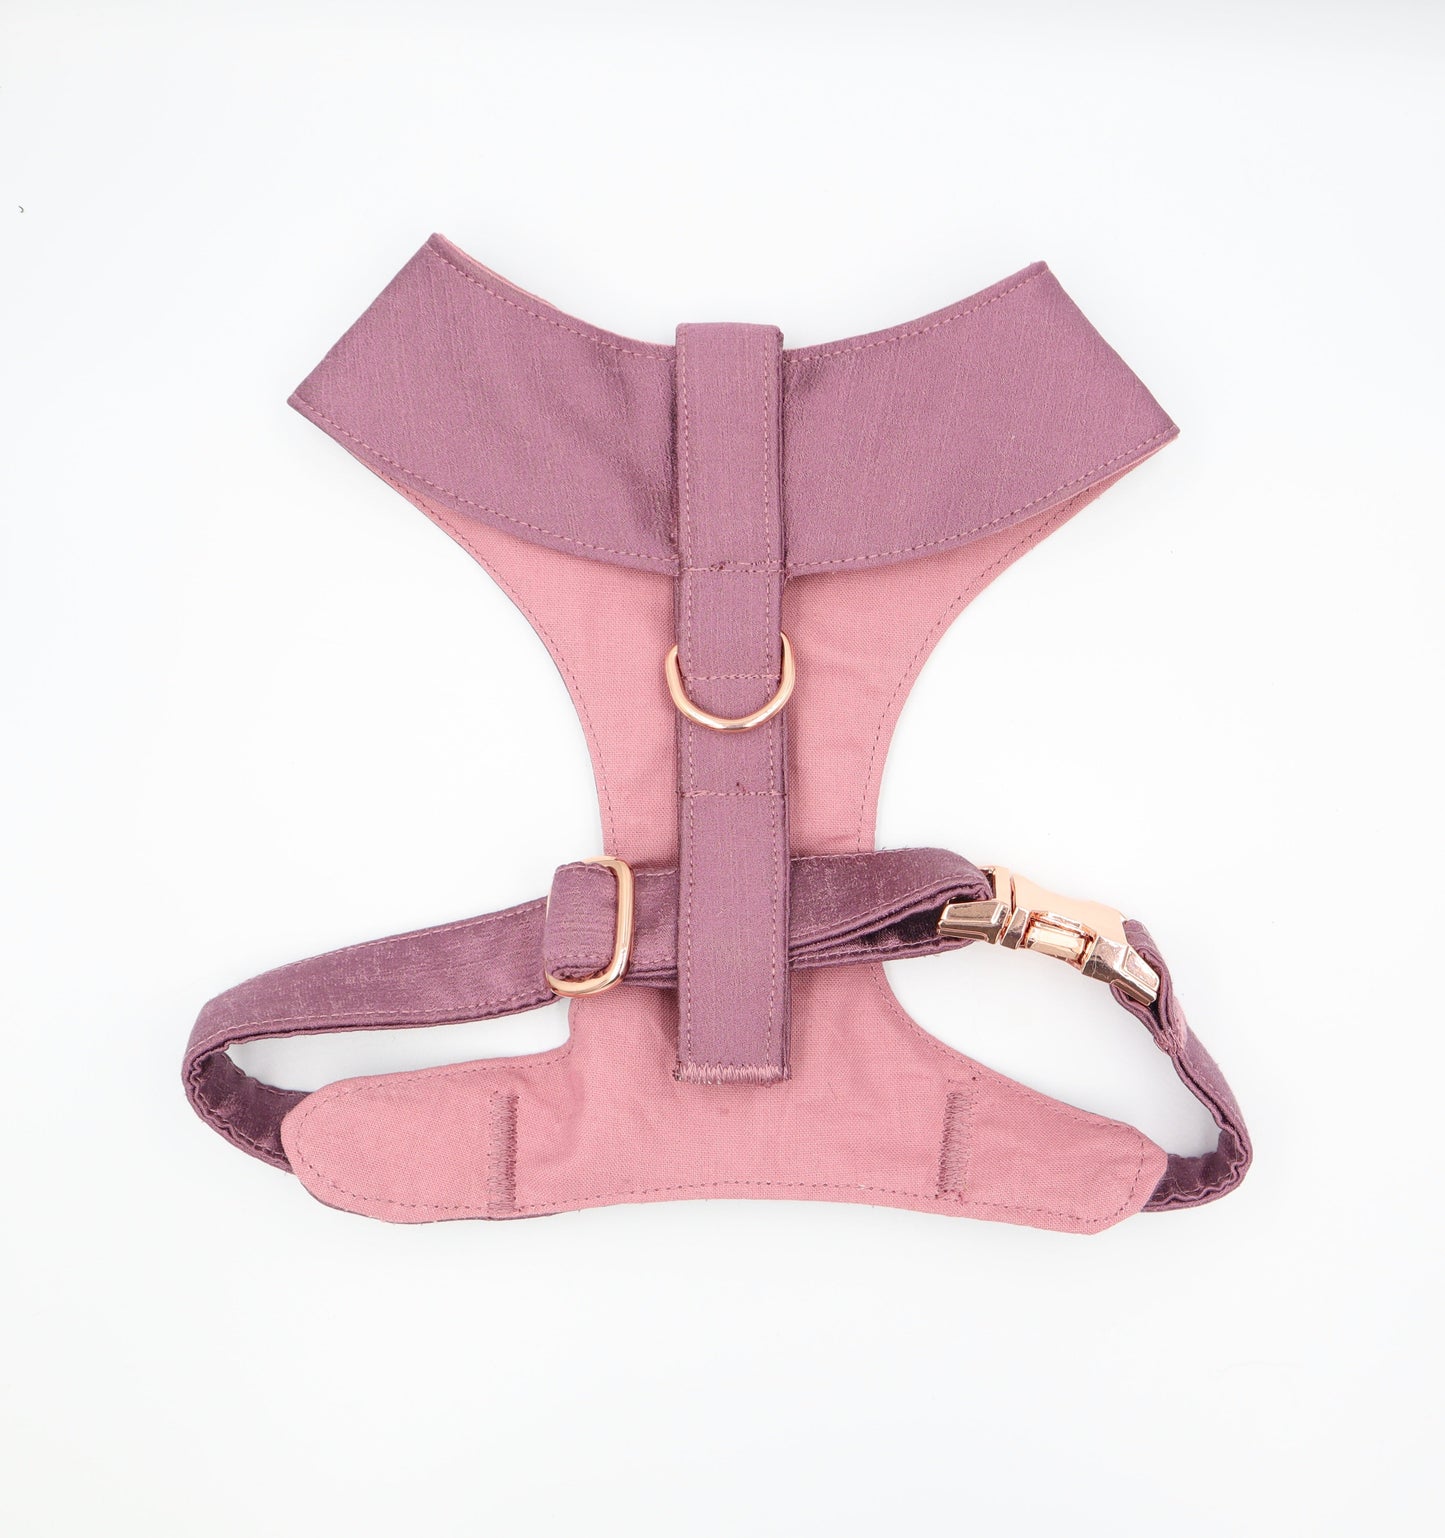 Tuxedo Wedding Dog Harness in Mauve Shot Silk Satin with Lavender Bow CHOICE of COLOURS